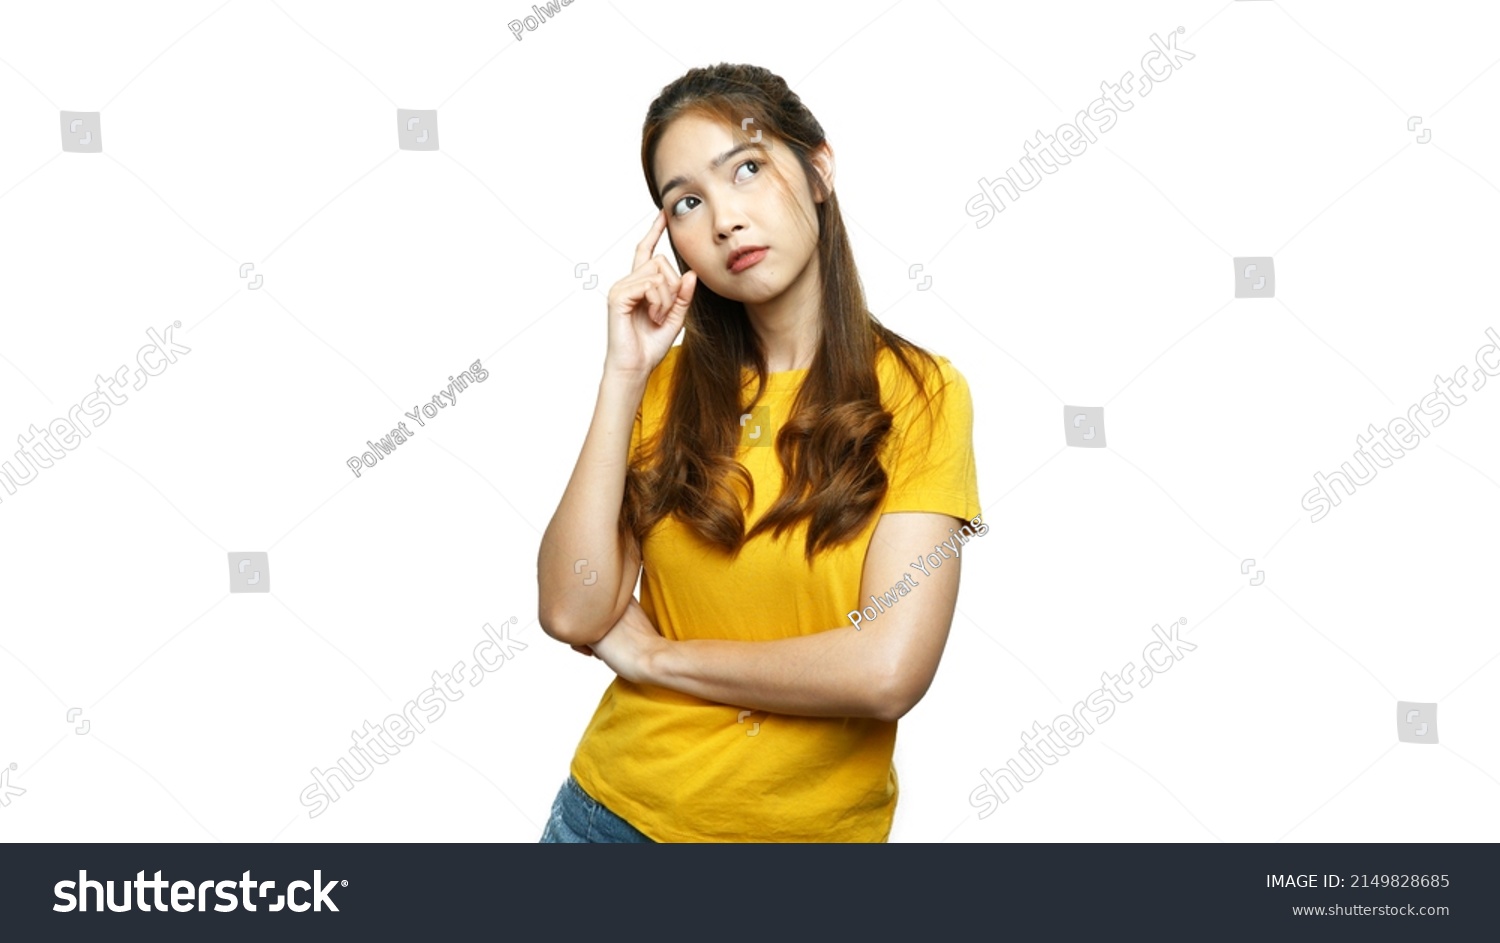 Young Asian woman thinking and pointing head, white background. The concept of perception. #2149828685